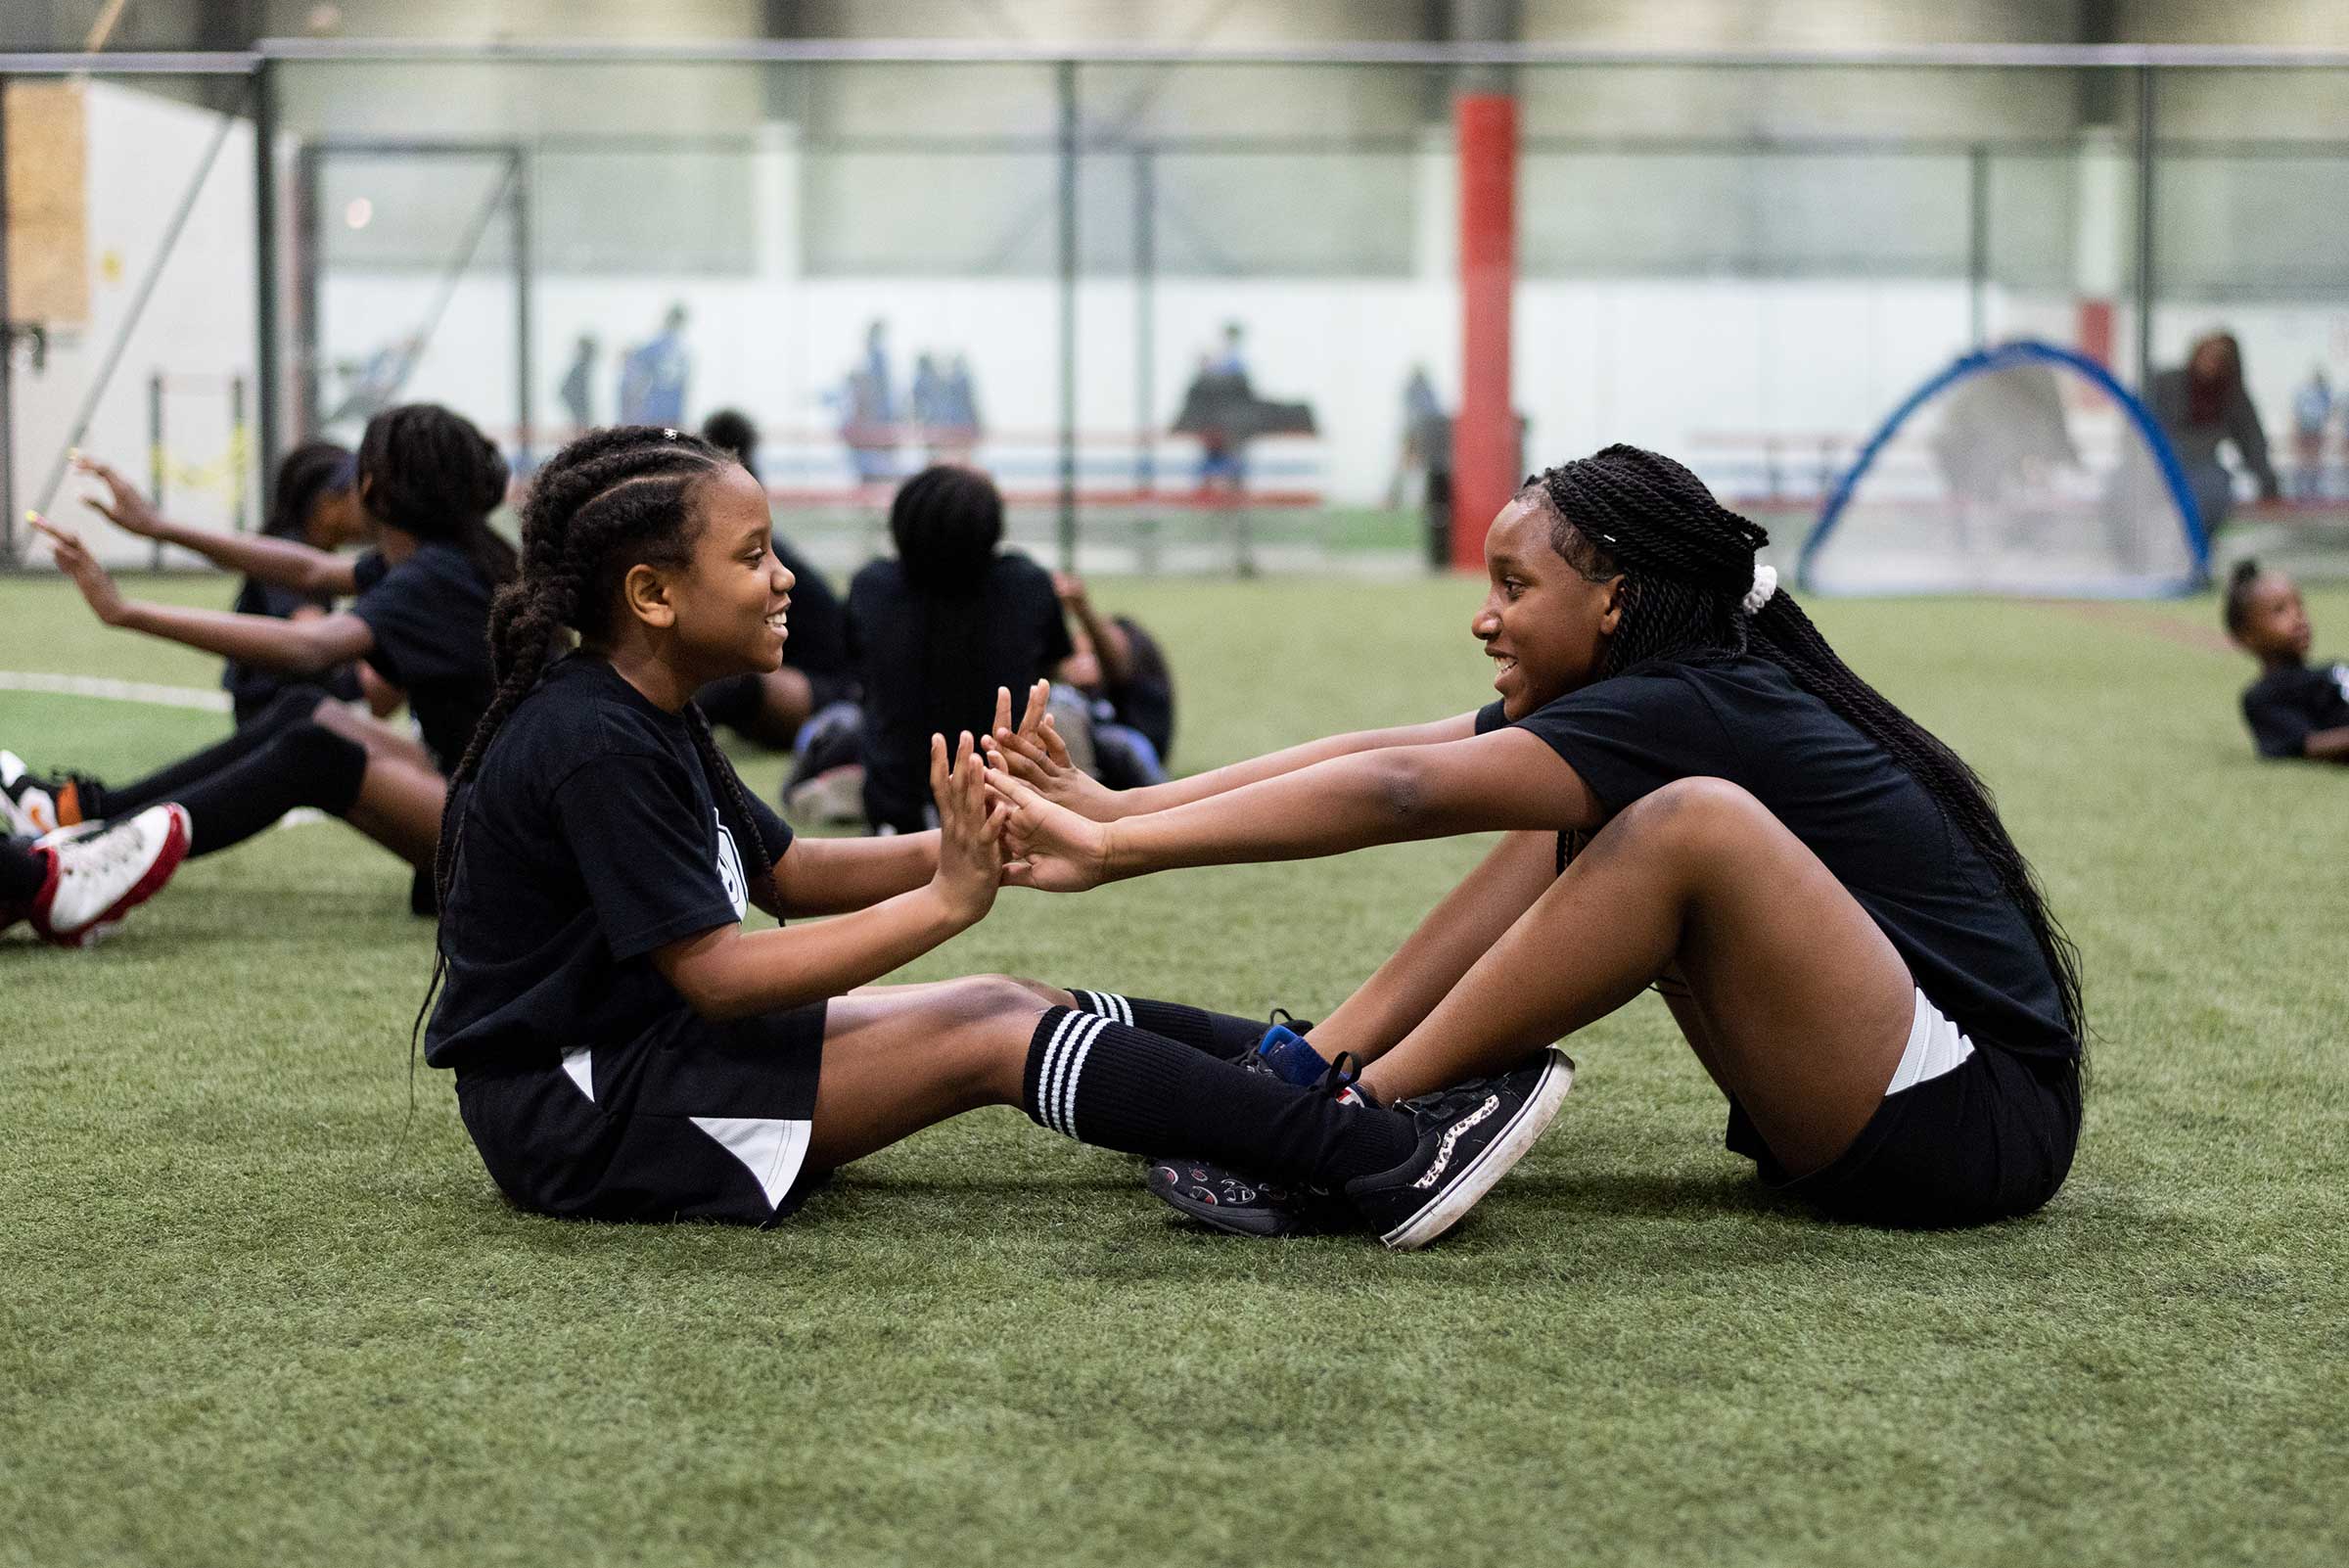 Two girls stretching before a soccer game